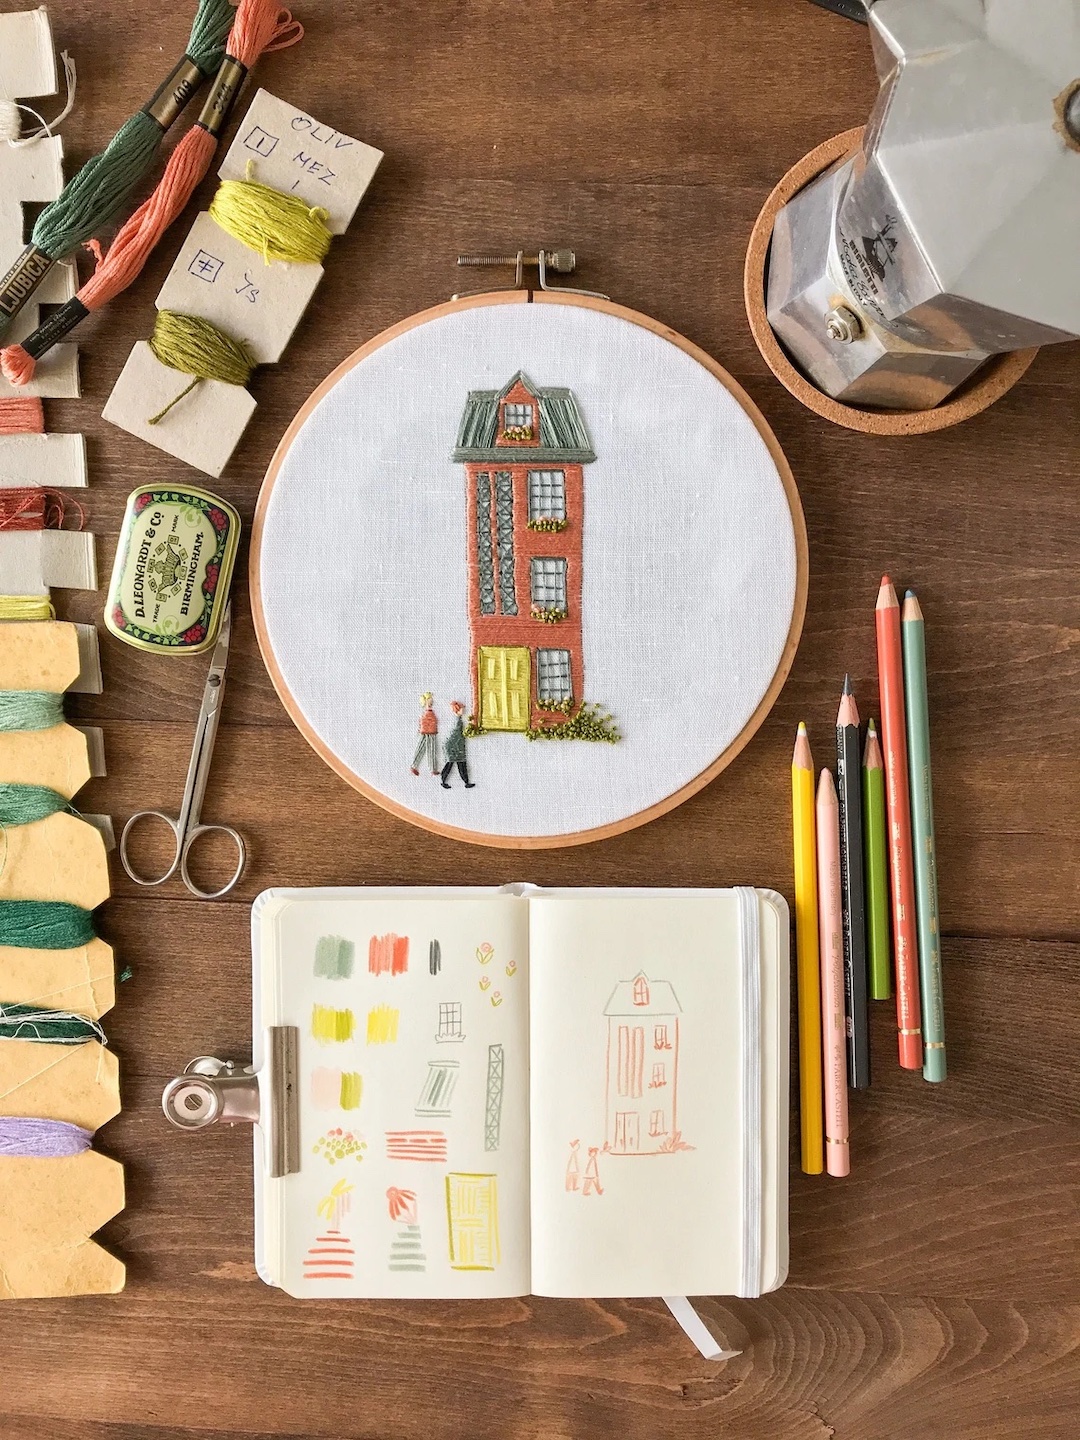 Modern hand embroidery pattern